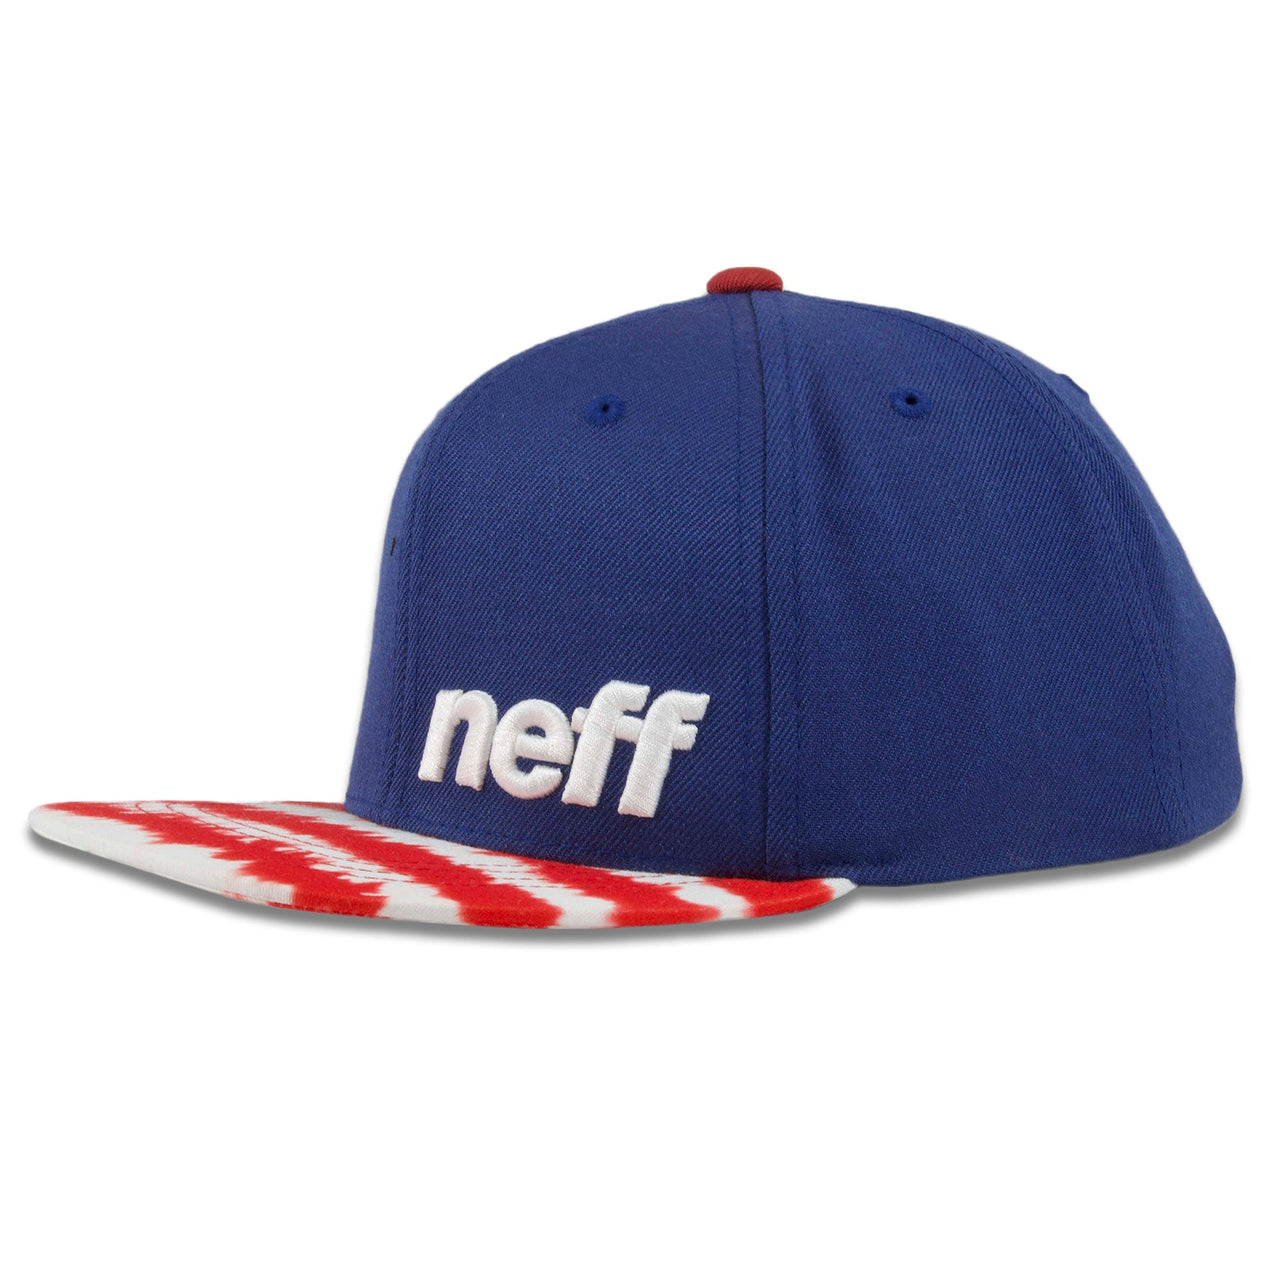 Neff Youth Daily Royal Blue on Red Tie-Dye Snapback Hat